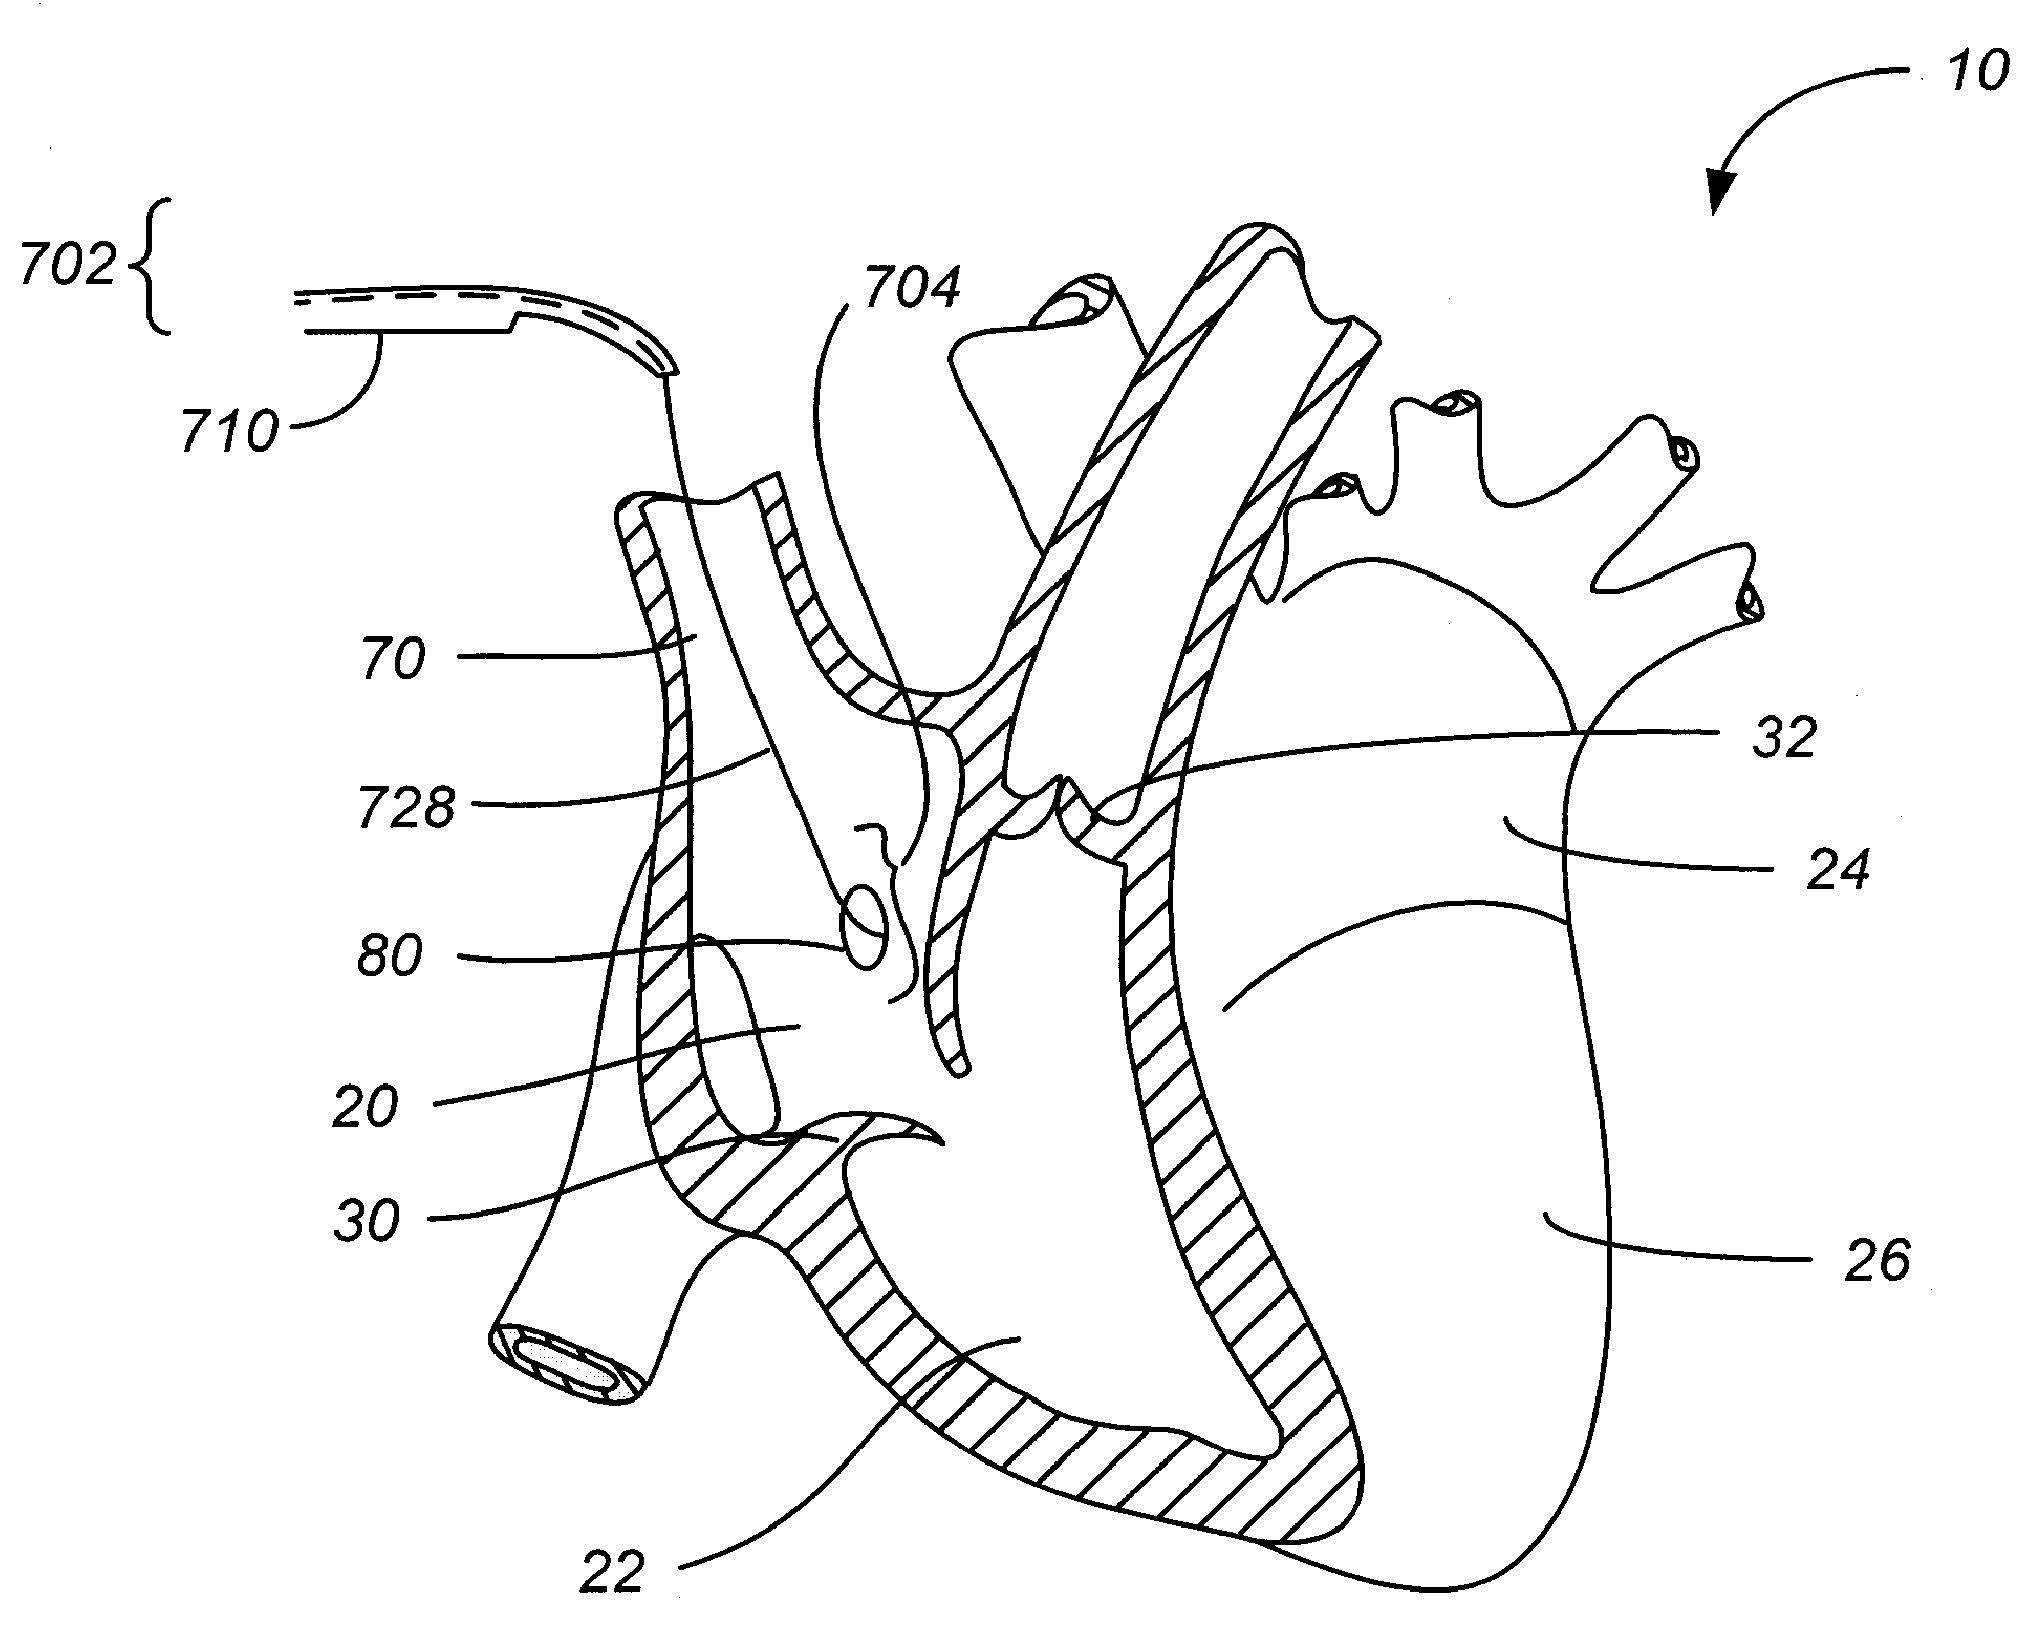 Transcoronary sinus pacing system, LV summit pacing, early mitral closure pacing, and methods therefor